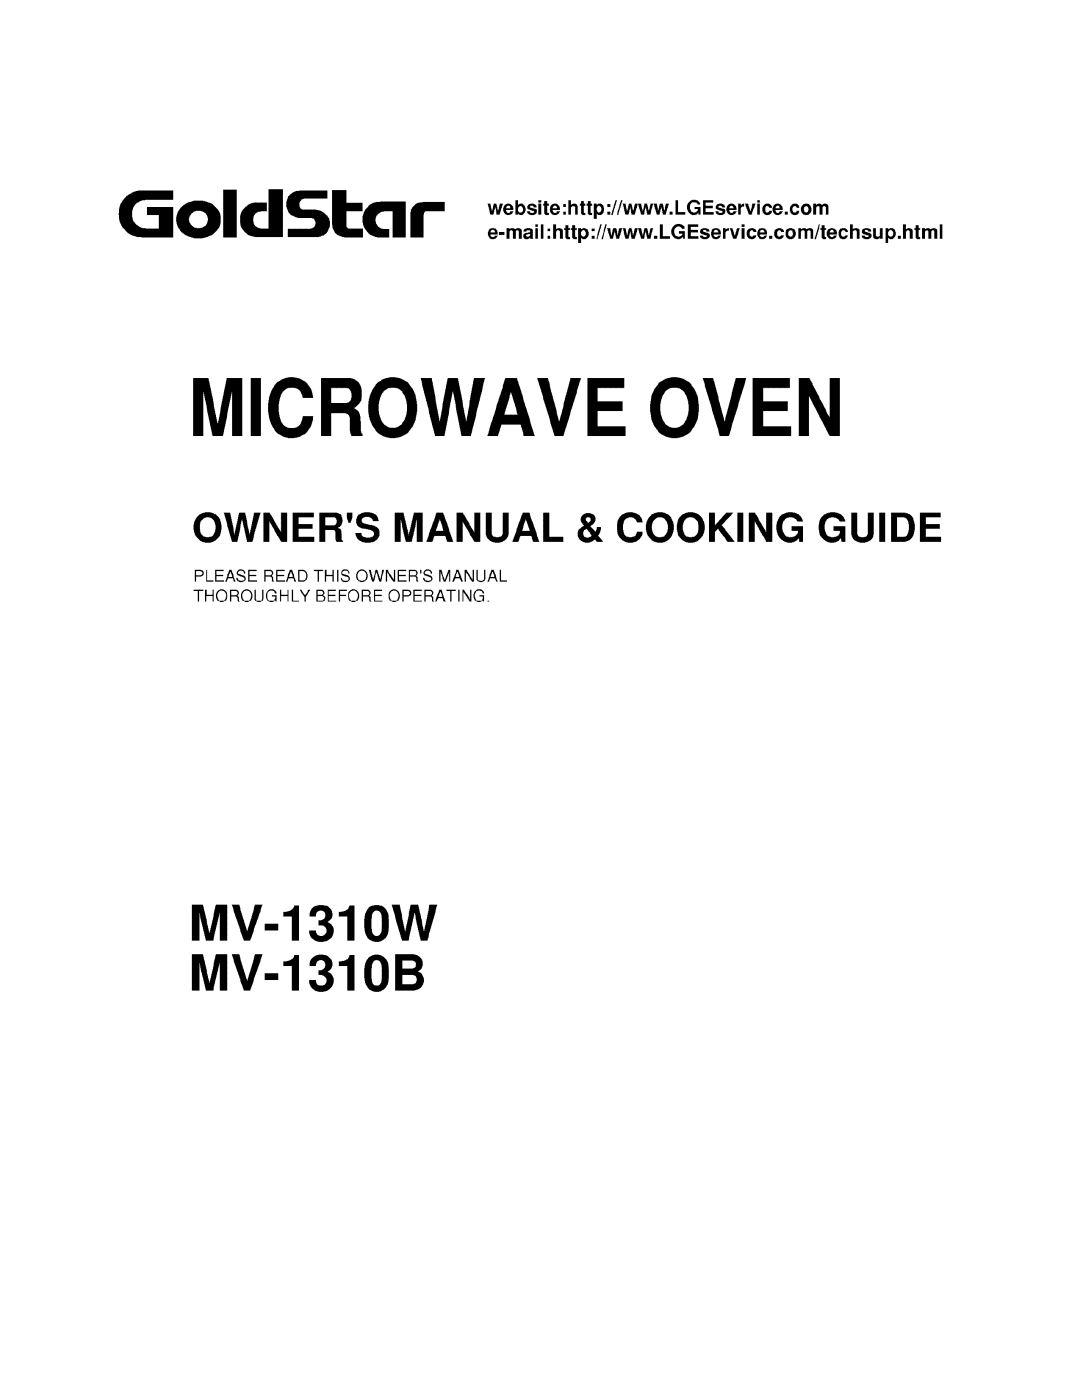 LG Electronics owner manual Microwaveoven, GoldStar, MV-1310W MV-1310B, Owners Manual & Cooking Guide 